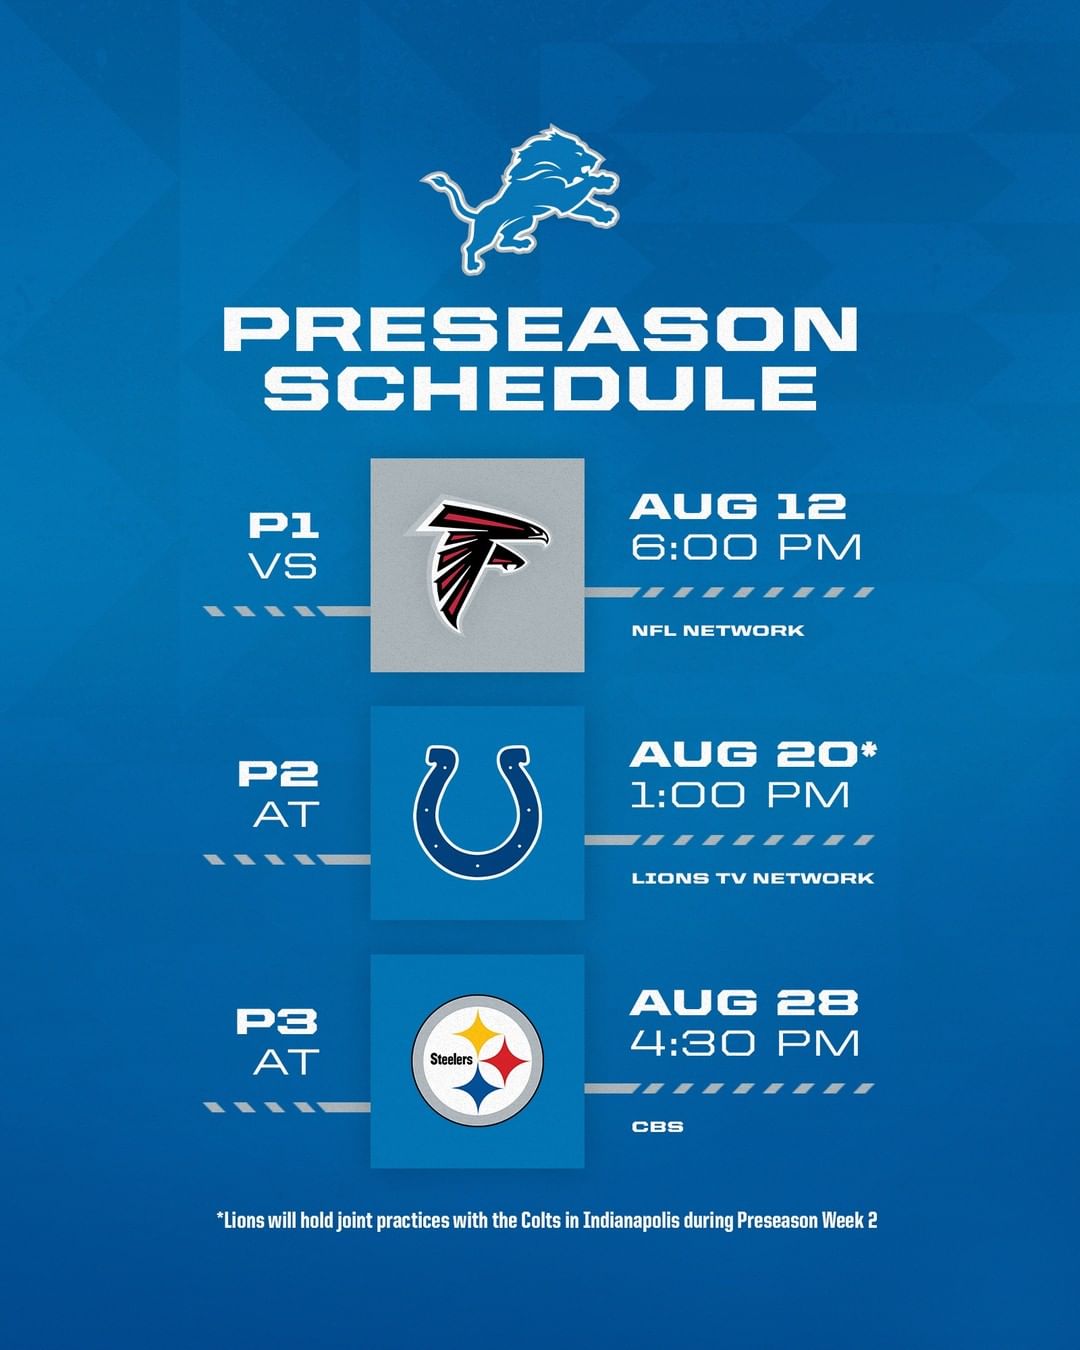 We've got the full details for our 2022 preseason matchups...